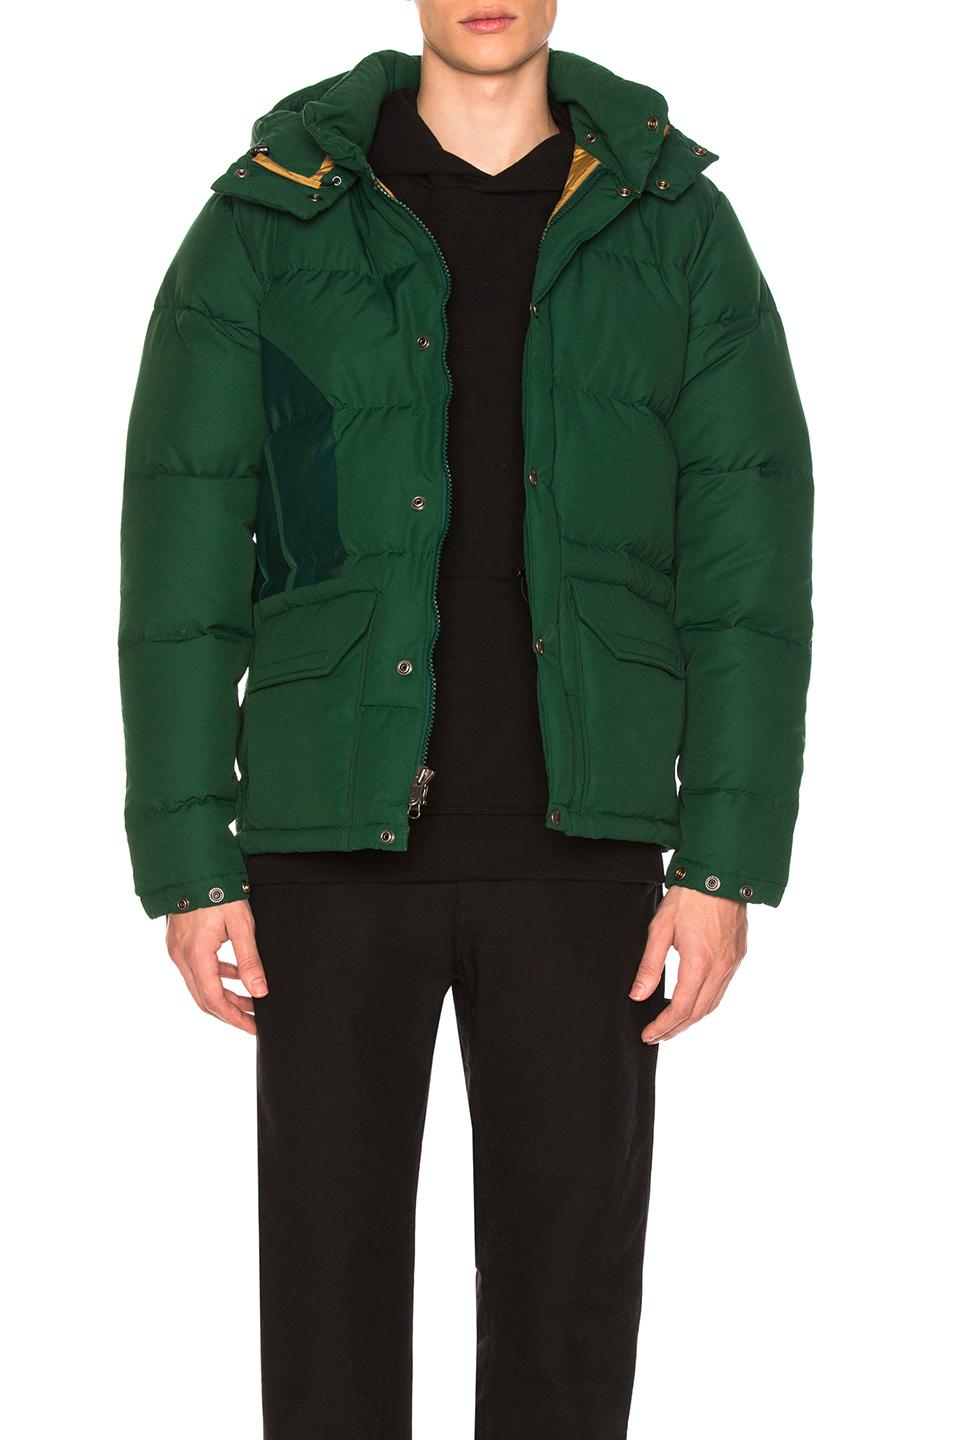 Lyst - Junya Watanabe X The North Face Cotton Jacket in Green